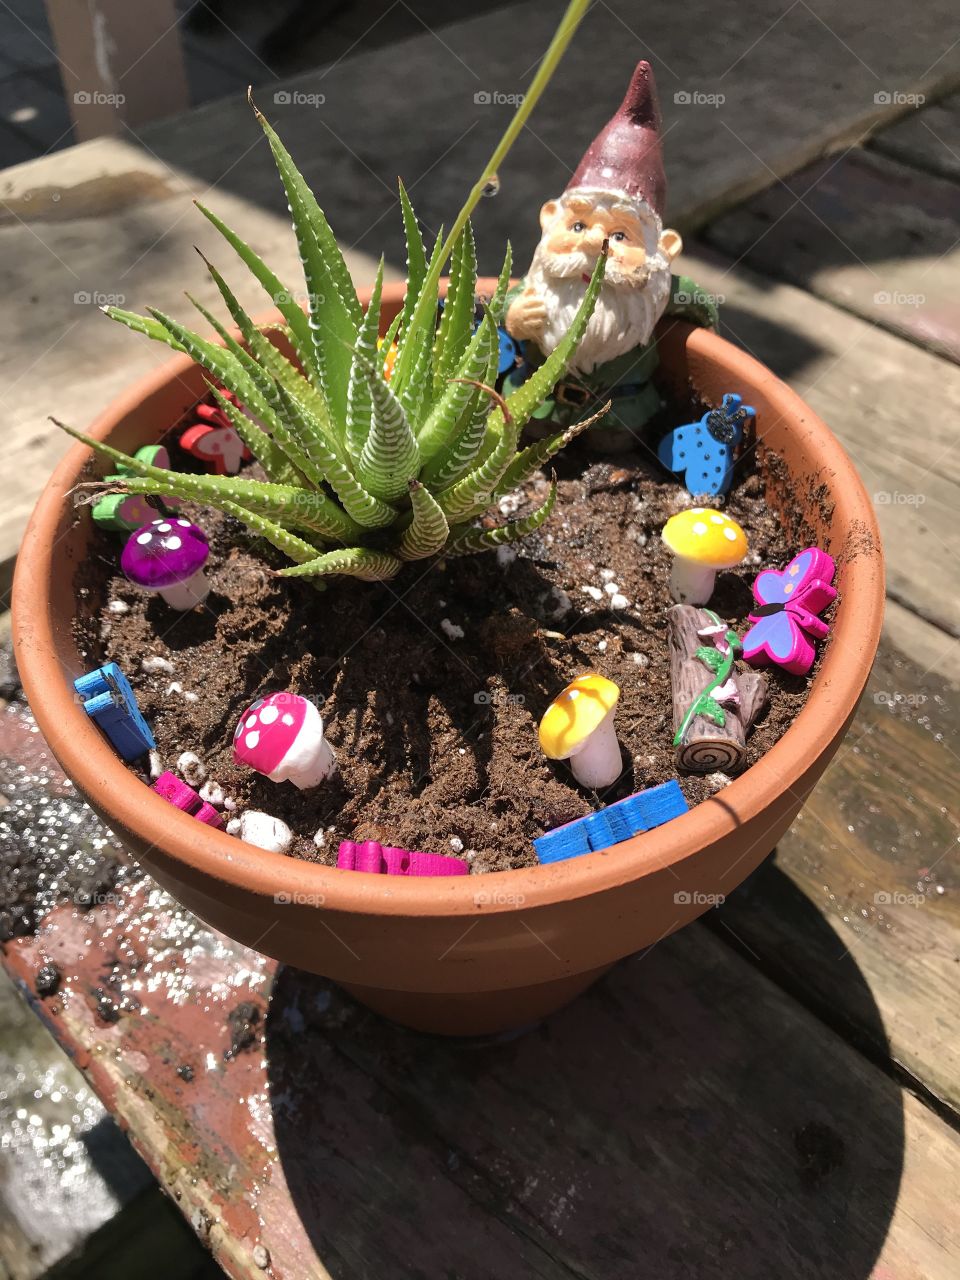 Small fairy garden projects with my little one! Super amazing early summer project and fun to watch grow.